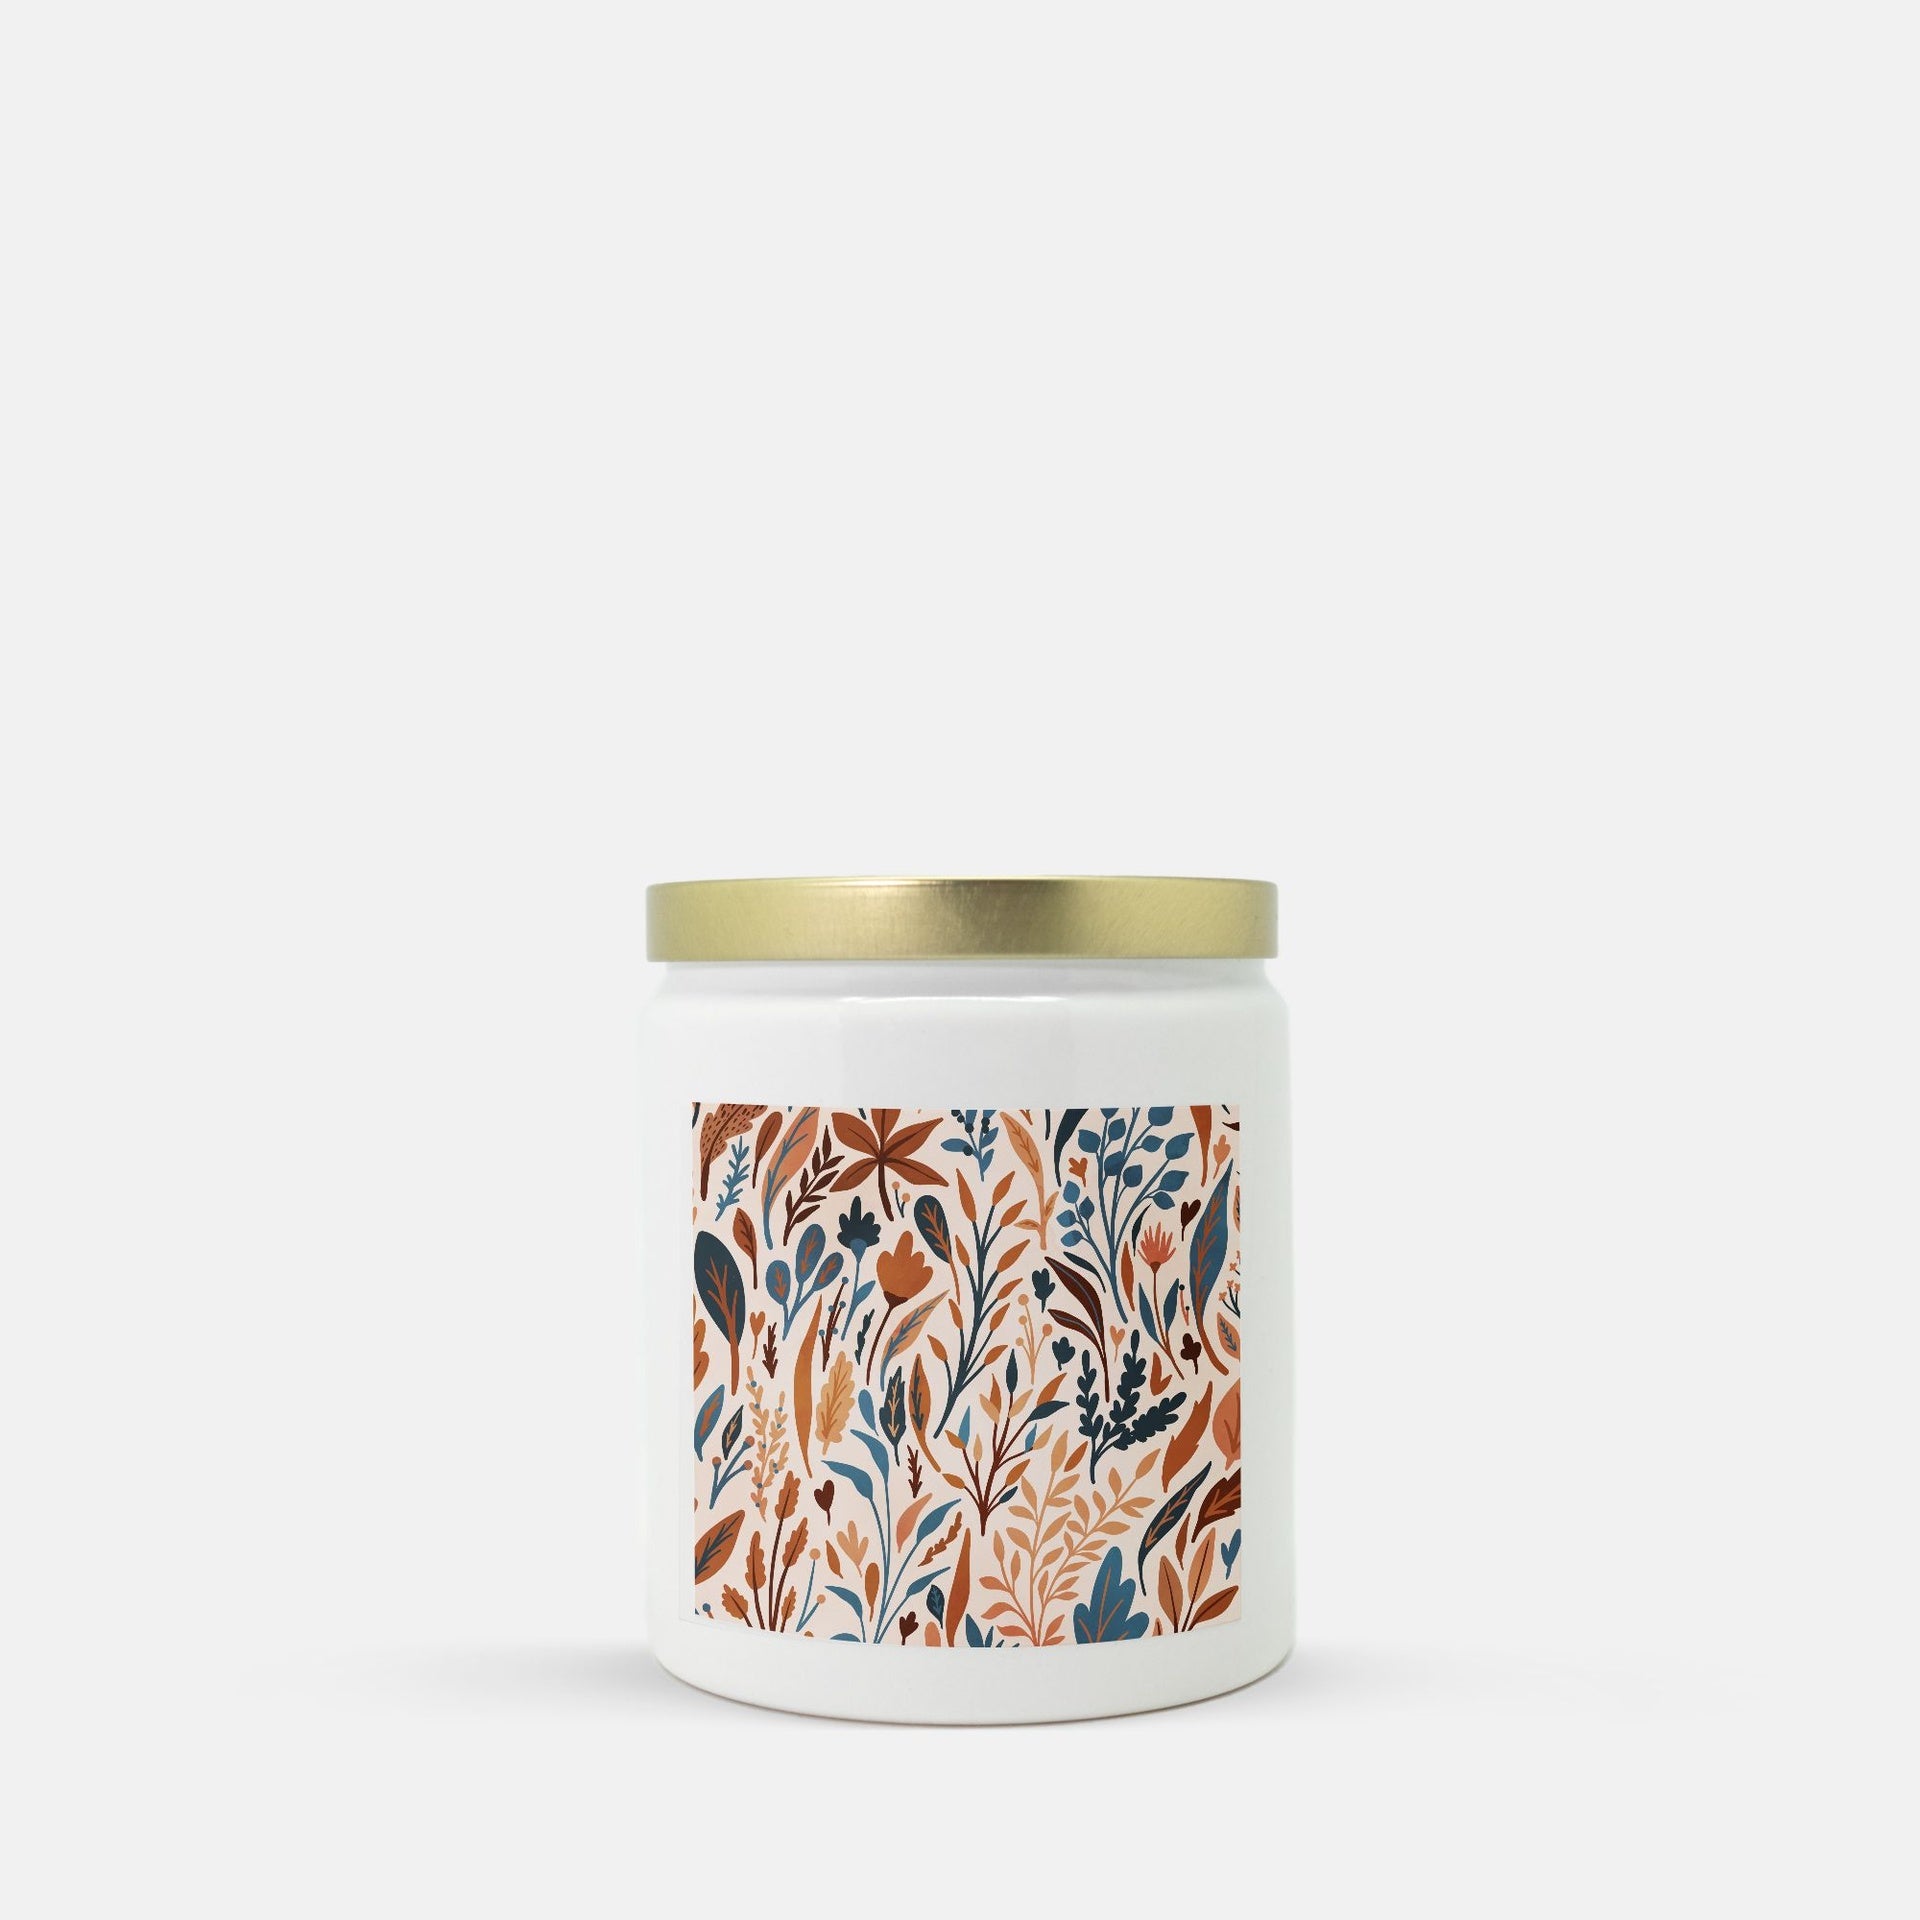 Lifestyle Details - Colorful Autumn Leaves Ceramic Candle w/ Gold Lid - Macintosh